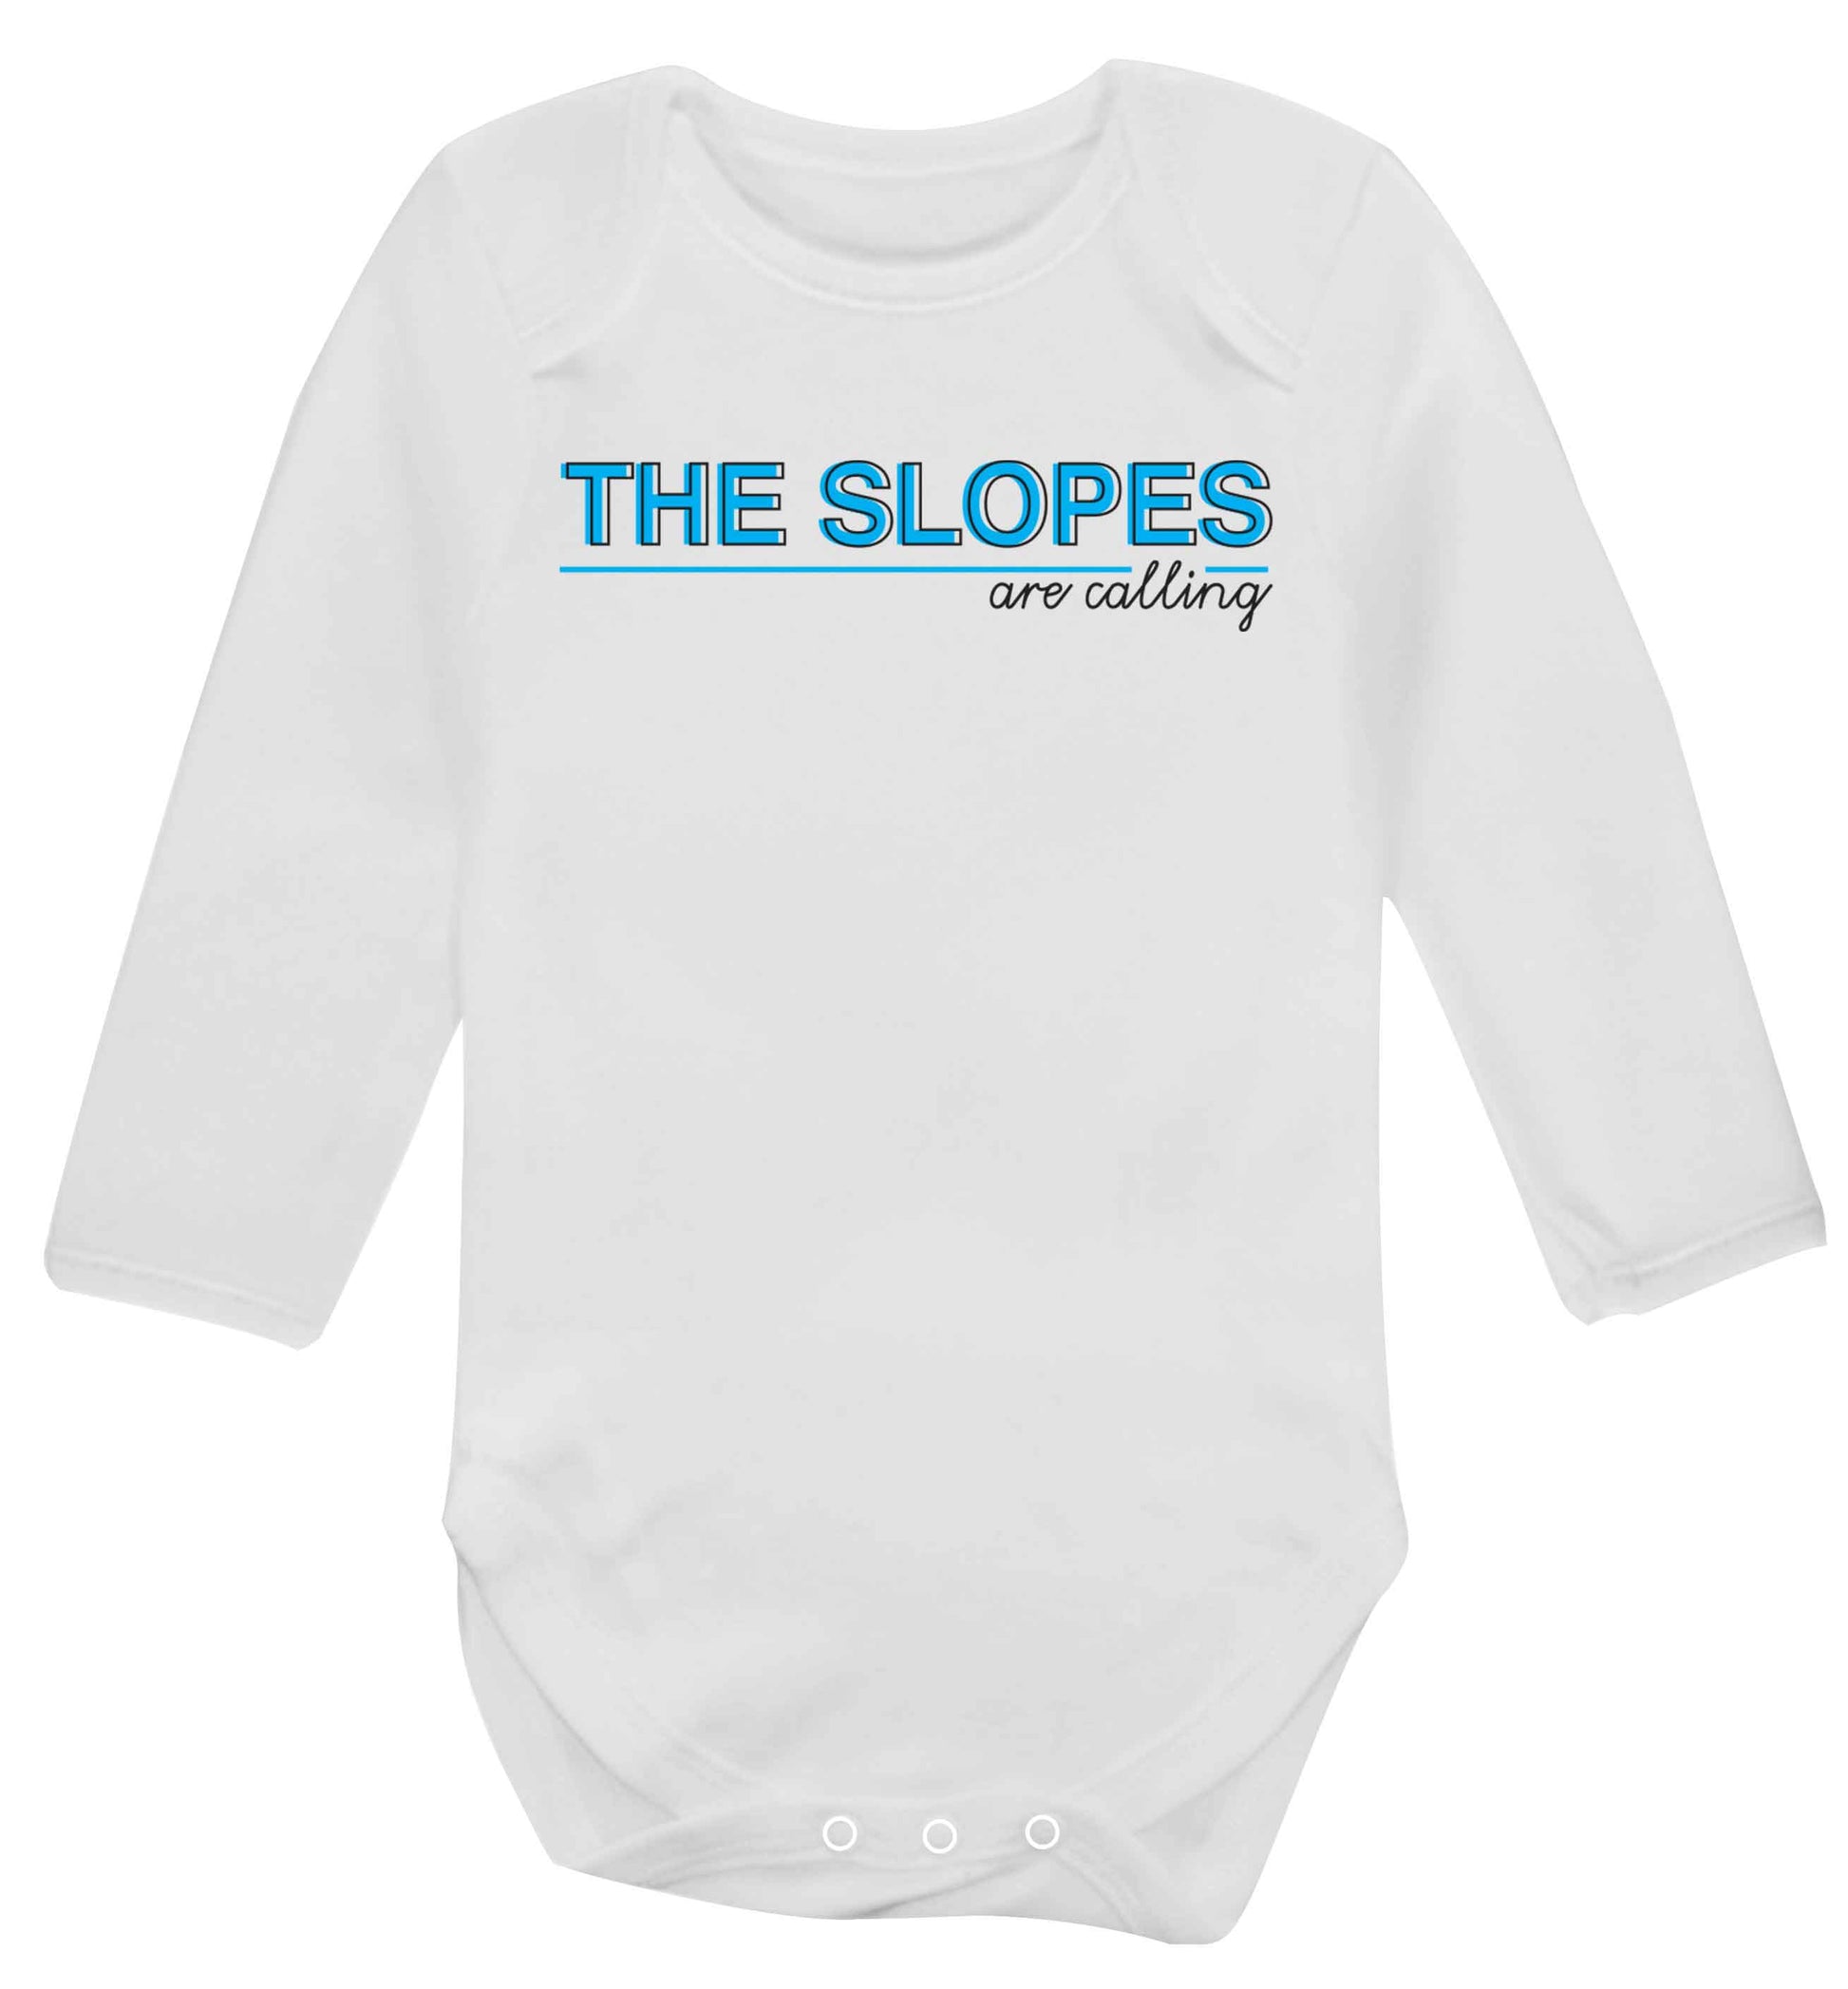 The slopes are calling Baby Vest long sleeved white 6-12 months